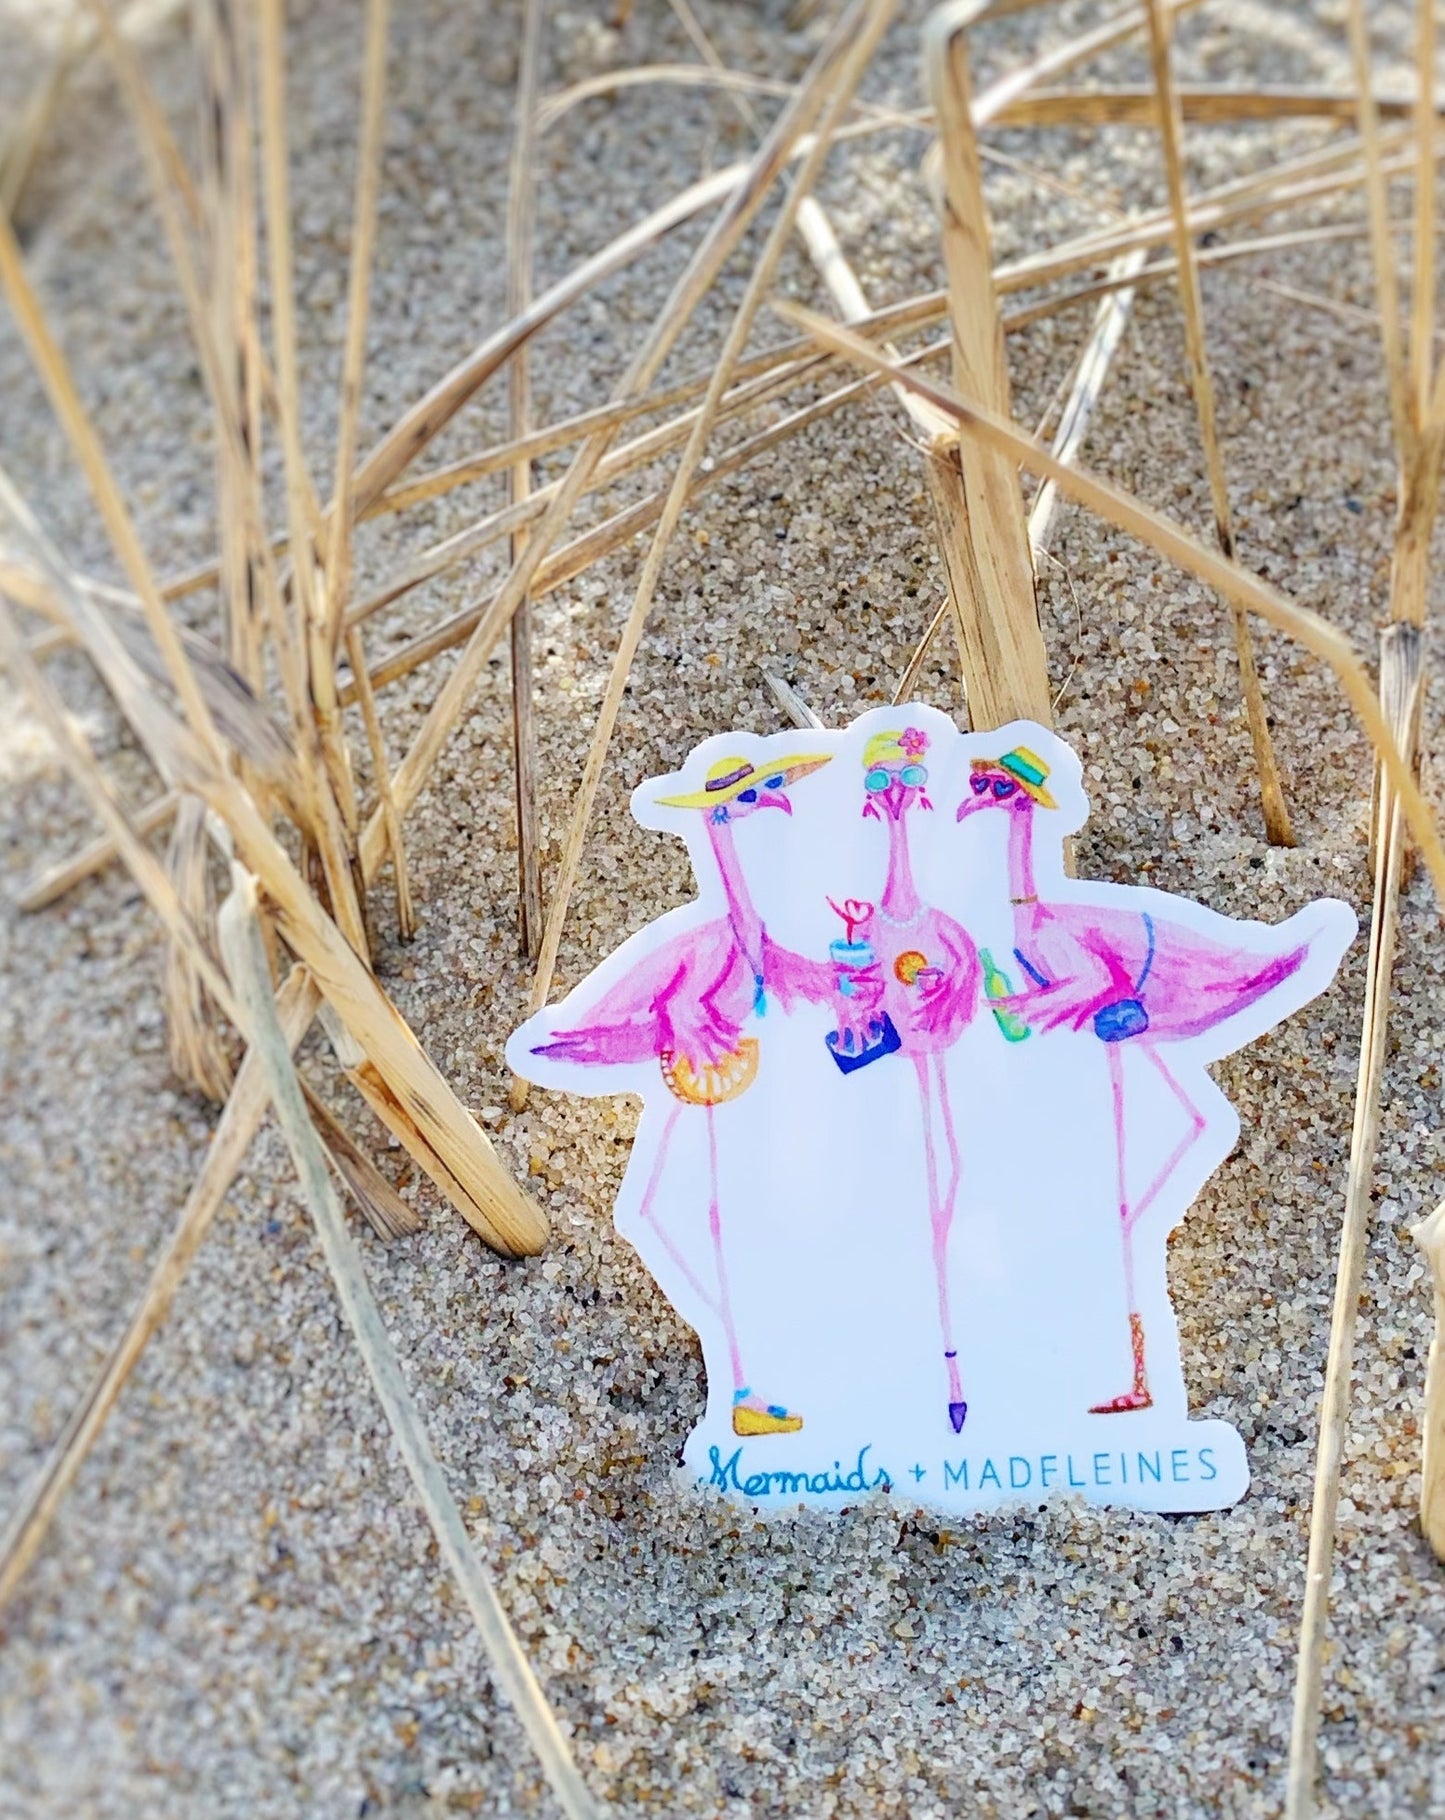 The flamingal sticker is created from original artwork made with acrylic paint and marker its 3 flamingo ladies dressed in summer hats and various footwear. This sticker is pictured sitting in the sand at the beach leaning against some beach grass